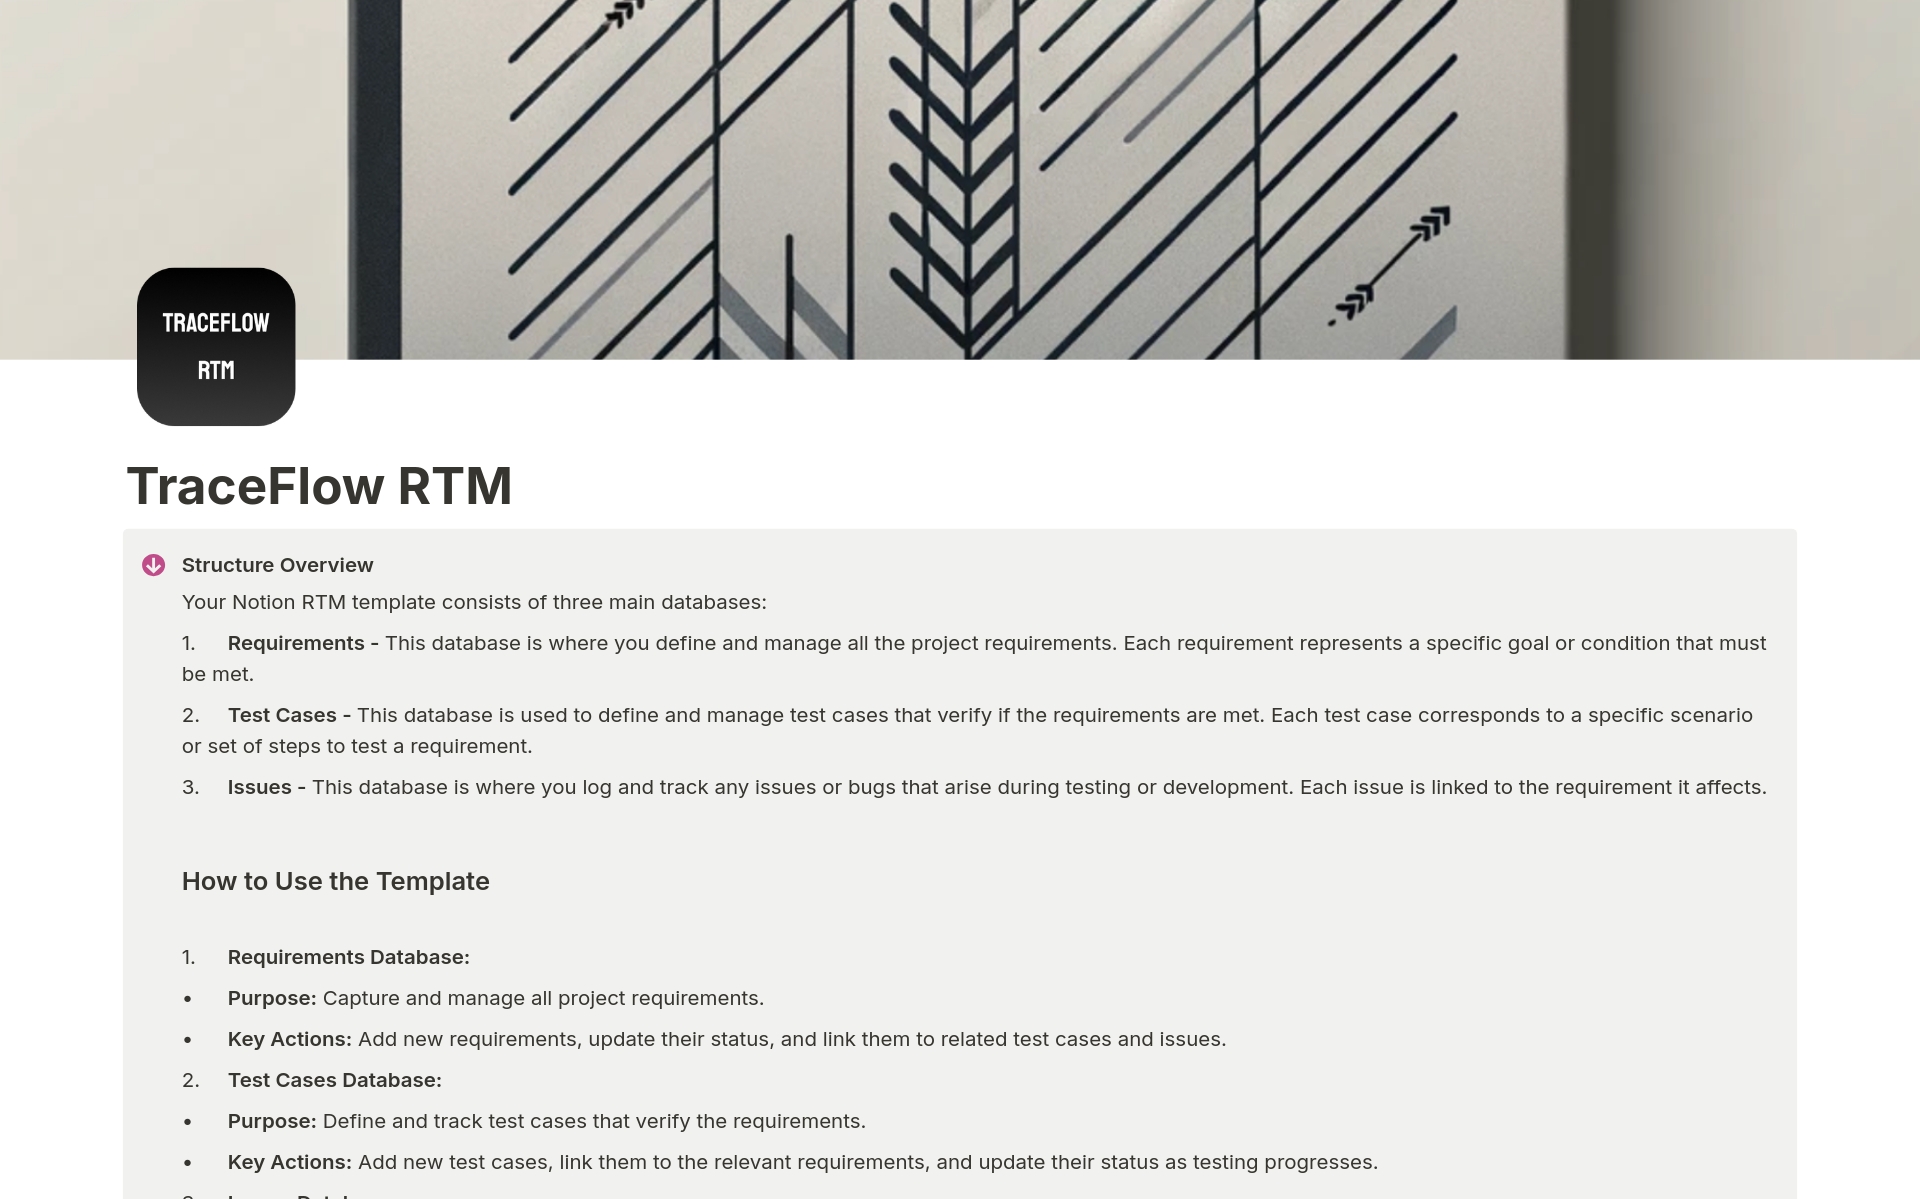 Introducing Traceflow RTM - the ultimate Notion template for managing requirements, test cases, and issues. Centralize your requirements, integrate test cases, and maintain an automated traceability matrix. Perfect for project managers, analysts, and QA teams. Streamline your pro